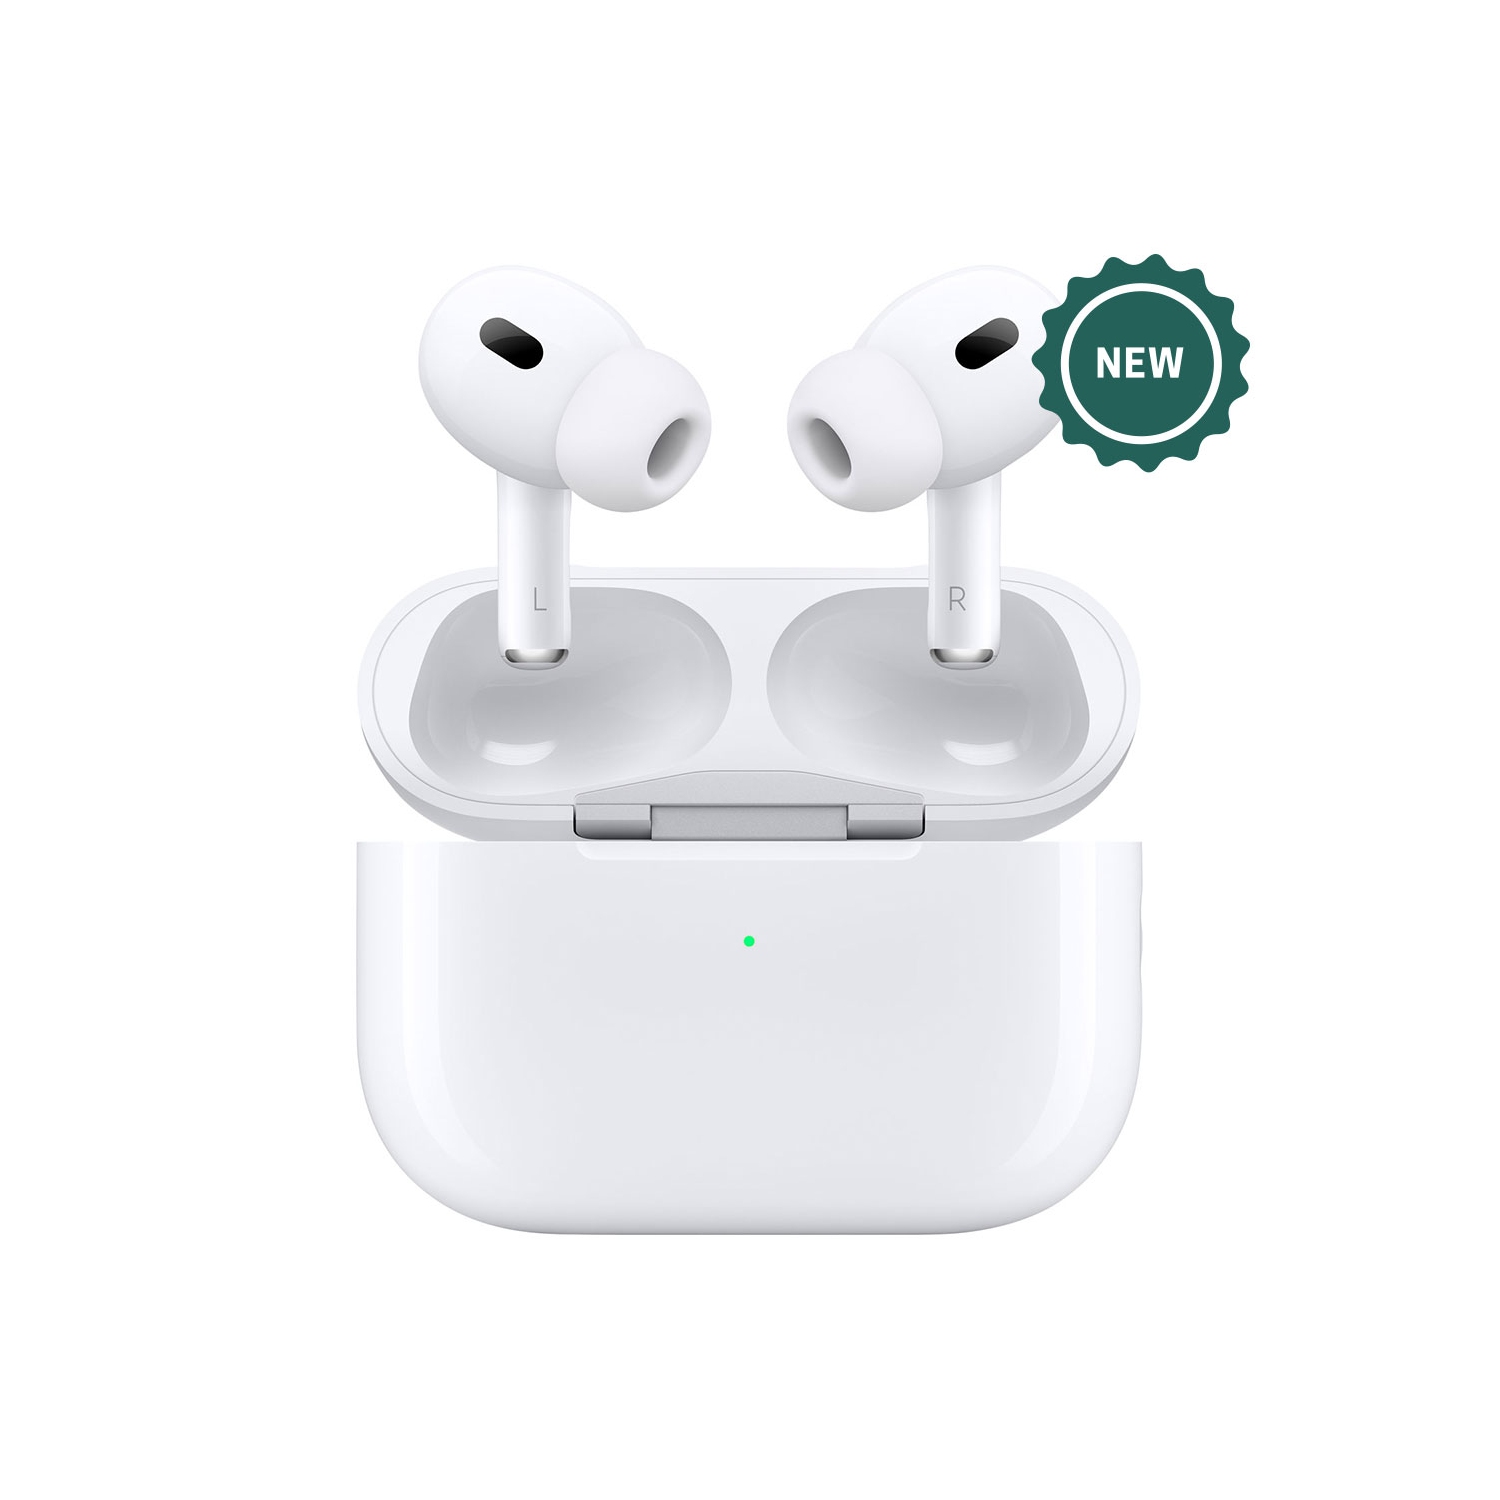 Apple AirPods Pro (2nd generation) Noise Cancelling True Wireless Earbuds with USB-C MagSafe Charging Case - BRAND NEW